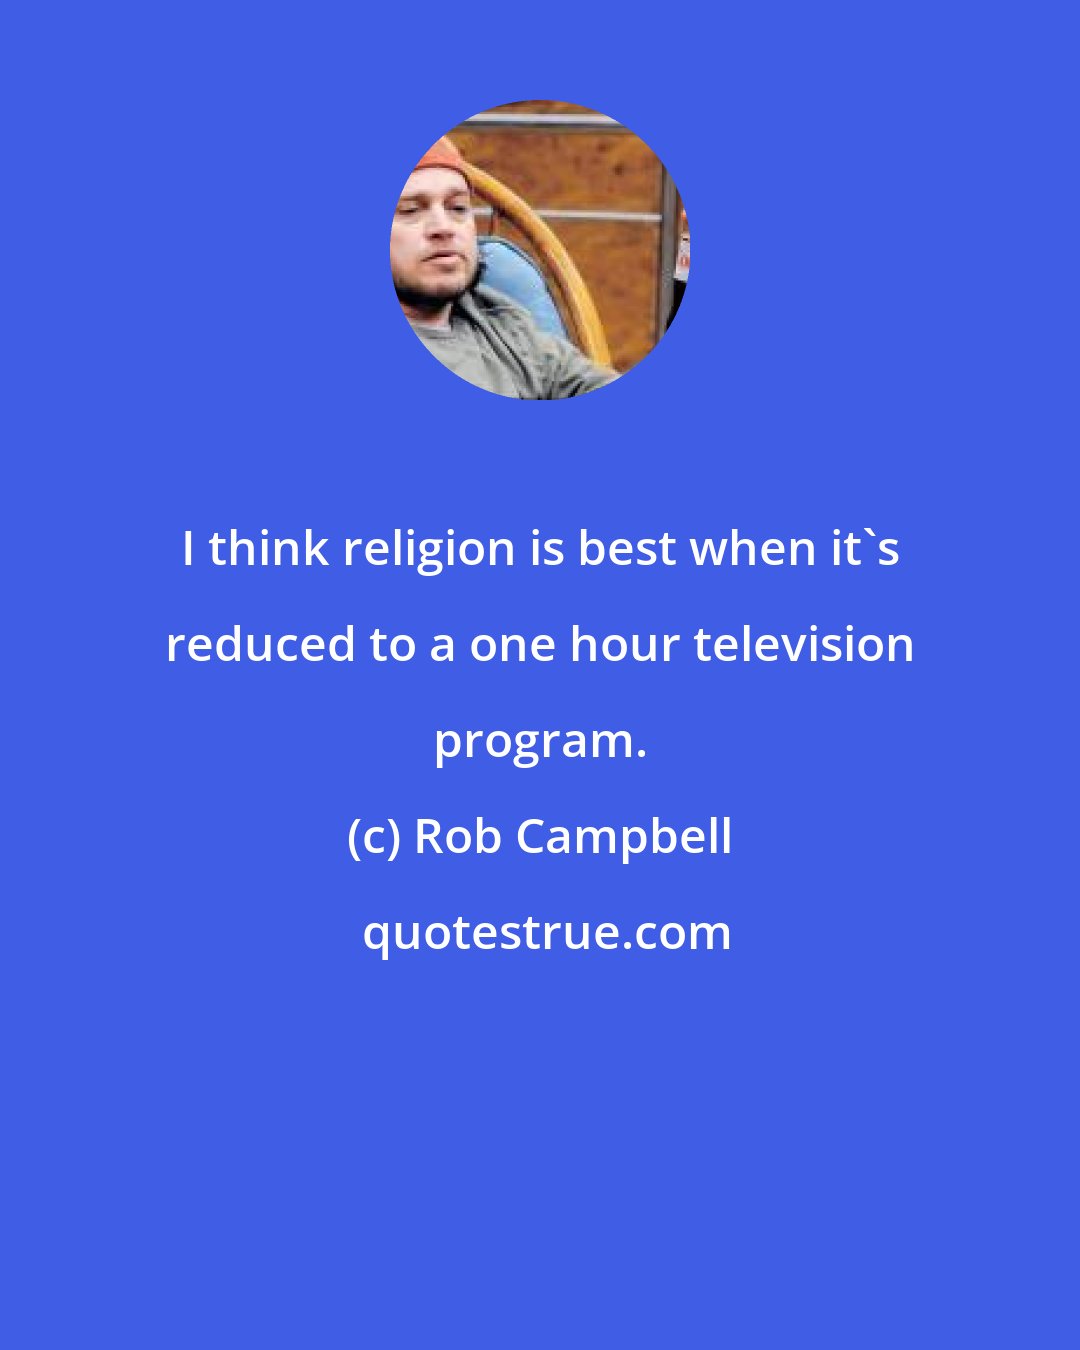 Rob Campbell: I think religion is best when it's reduced to a one hour television program.